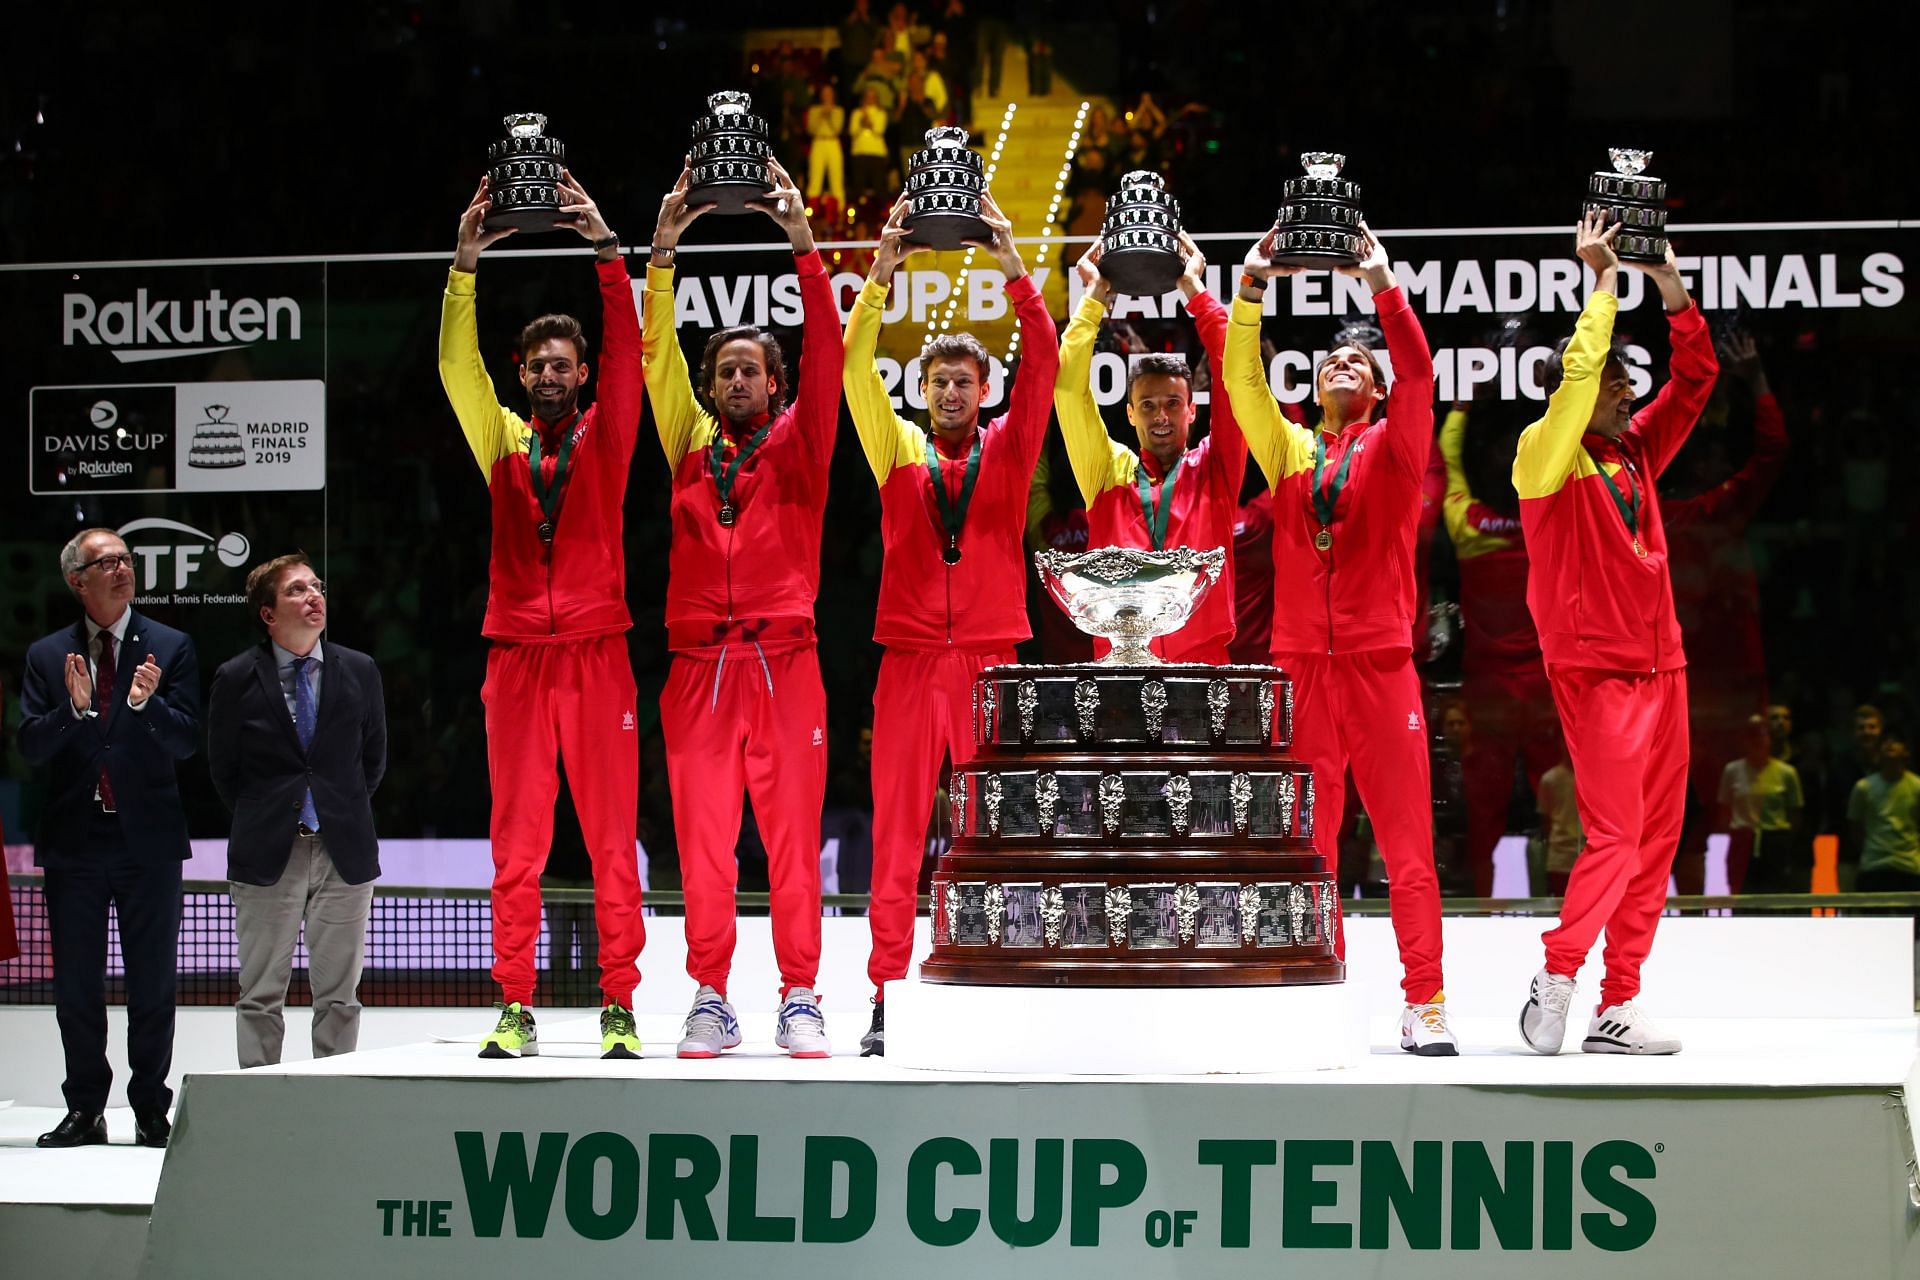 A victorious Spanish side, including Rafael Nadal, lift the 2019 Davis Cup title.